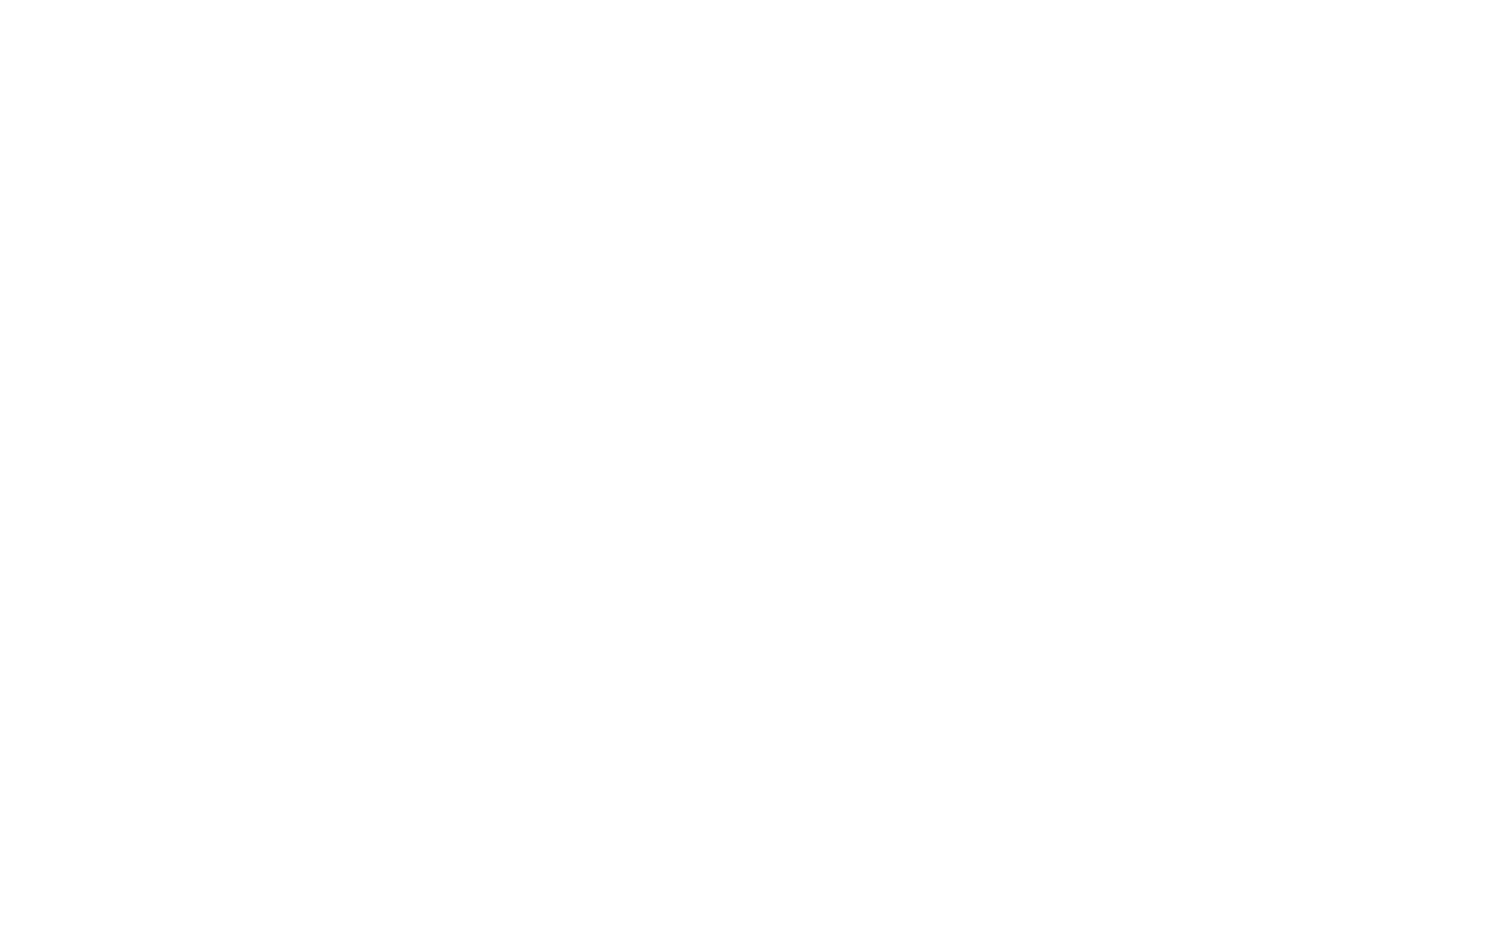 ShadowBrooke Golf Course in Lester Prairie Minnesota